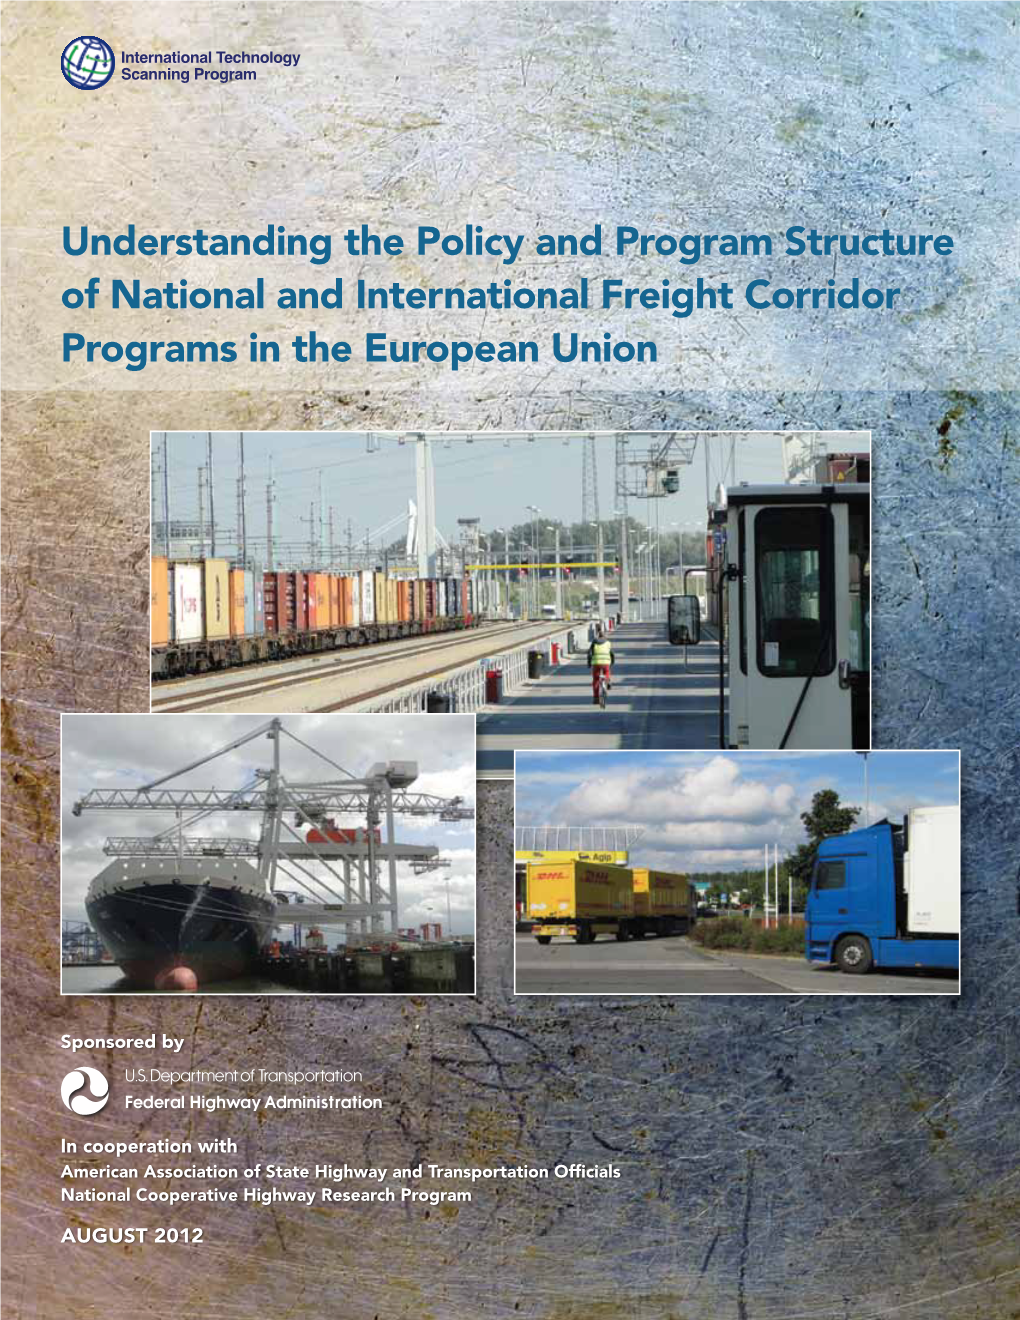 Understanding the Policy and Program Structure of National and International Freight Corridor Programs in the European Union